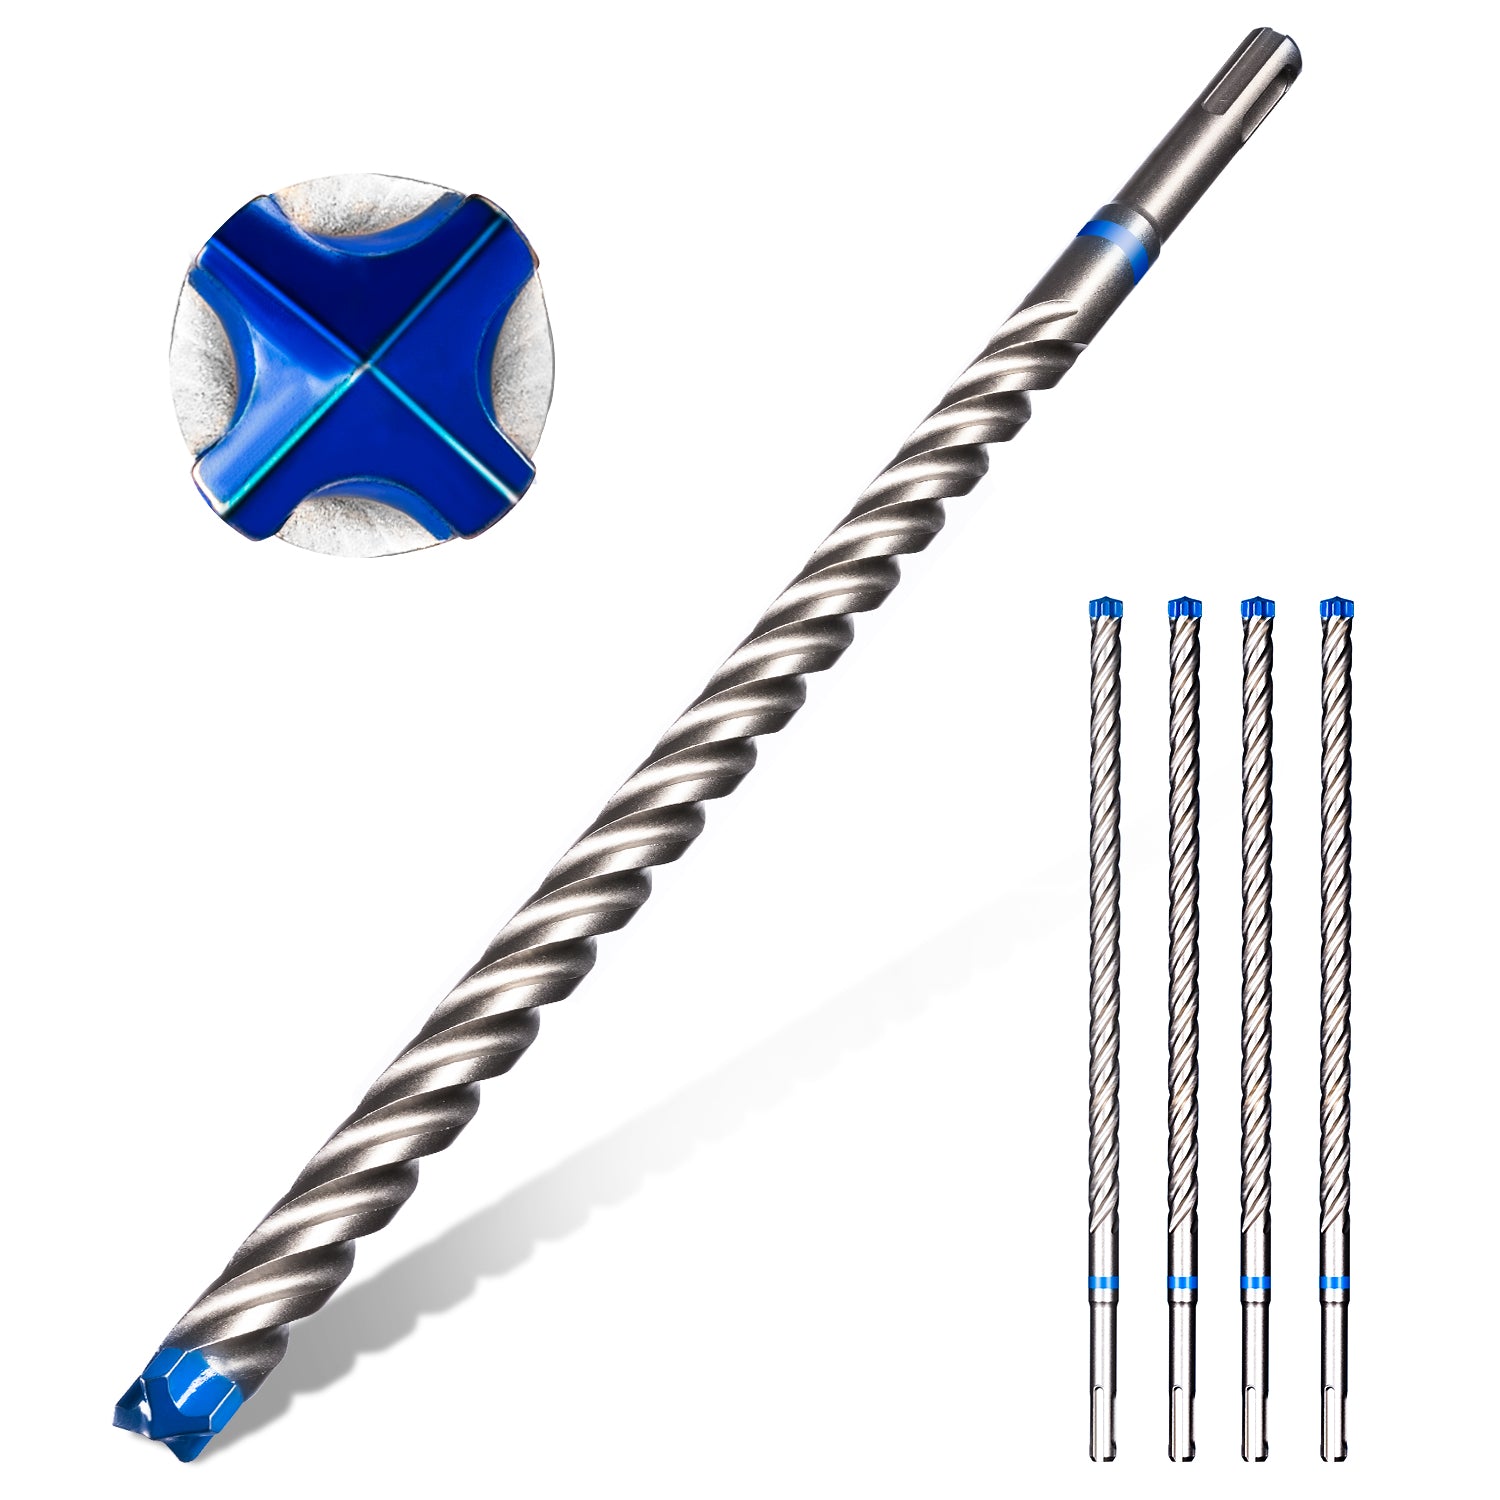 SDS Plus Rotary Hammer Drill Bits with Carbide-Tip for Bricks, Blocks, Stone